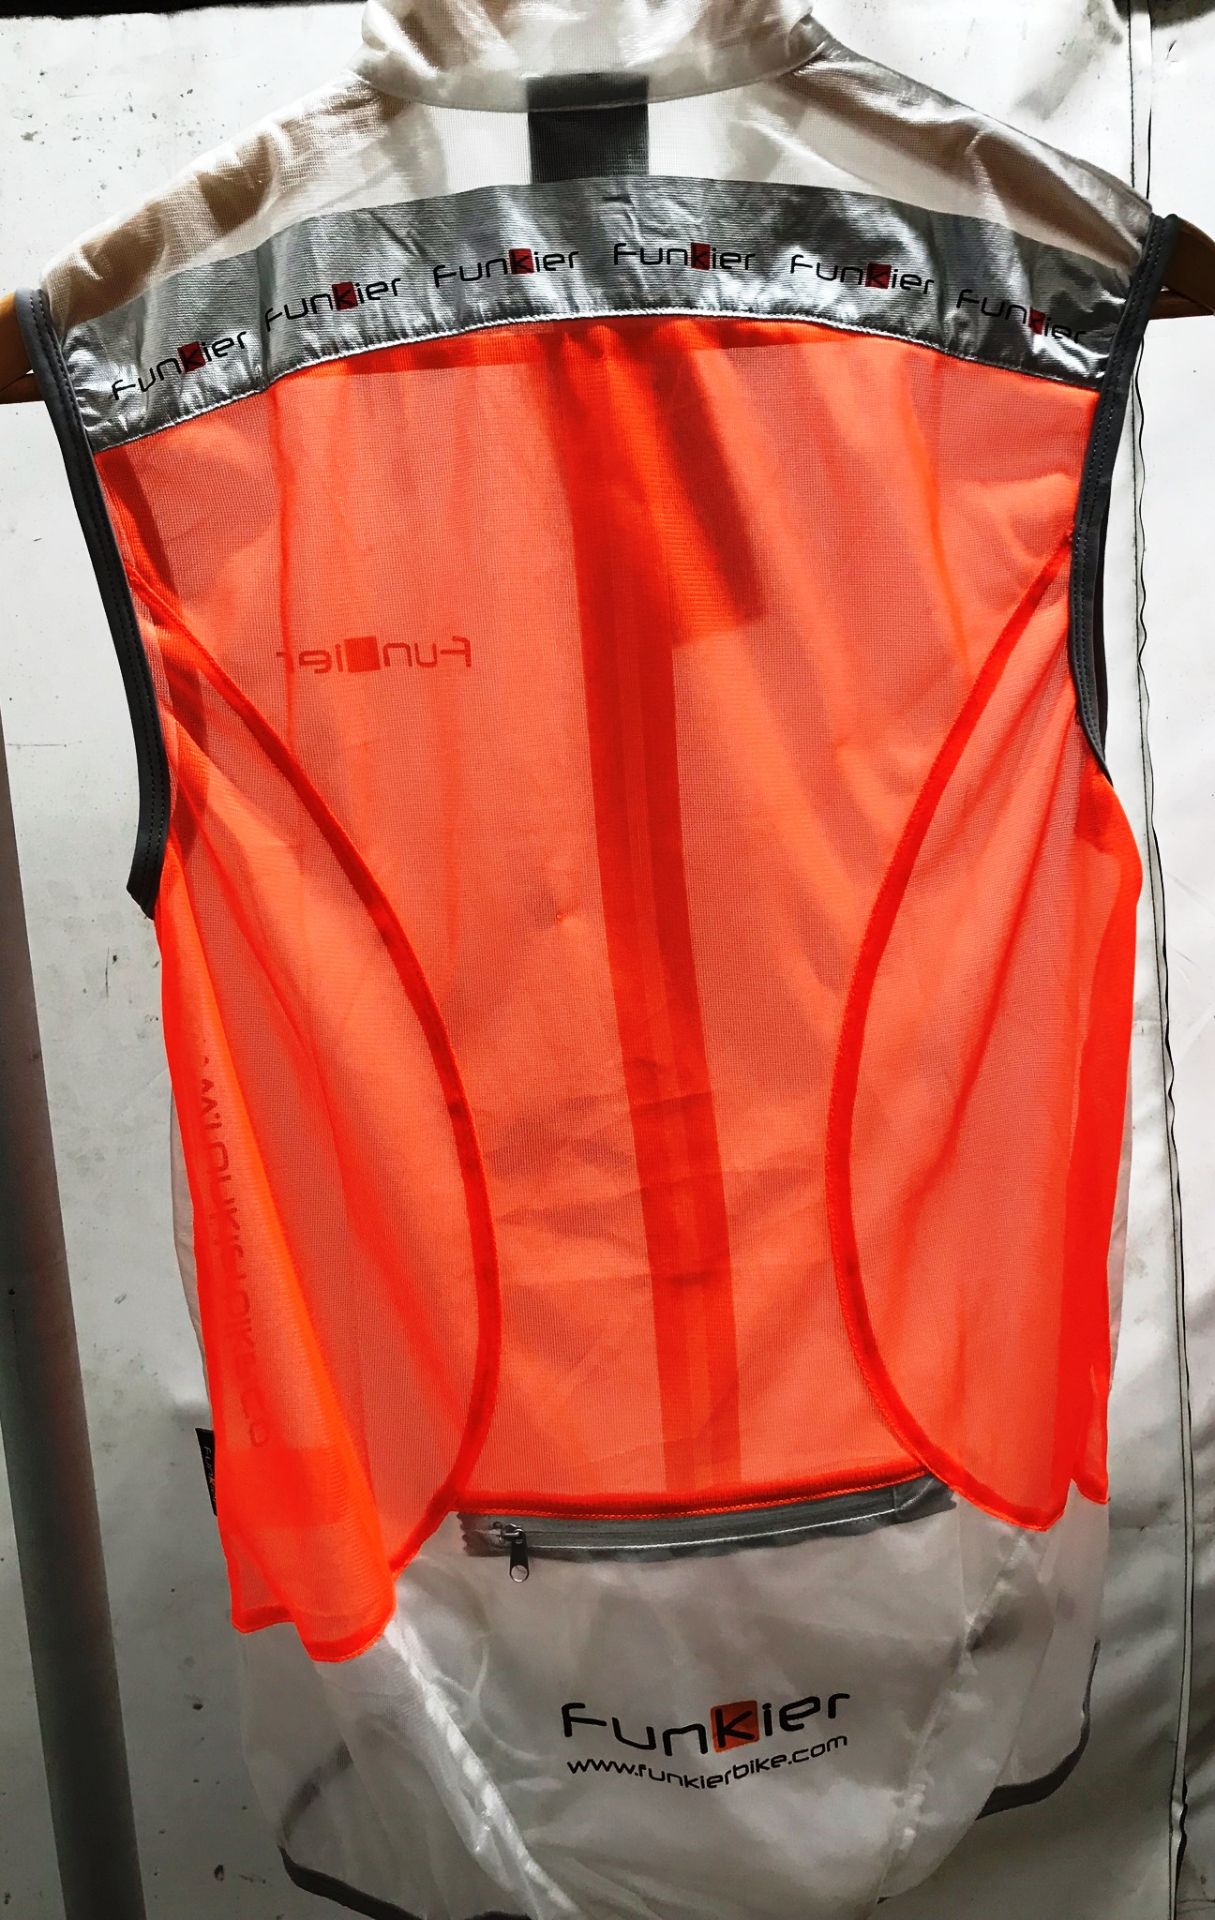 5 x Funkier Cycling Transparent Windbreaker Gilets - Various Sizes - RRP £174.95 - New w/ Tags - Image 3 of 4